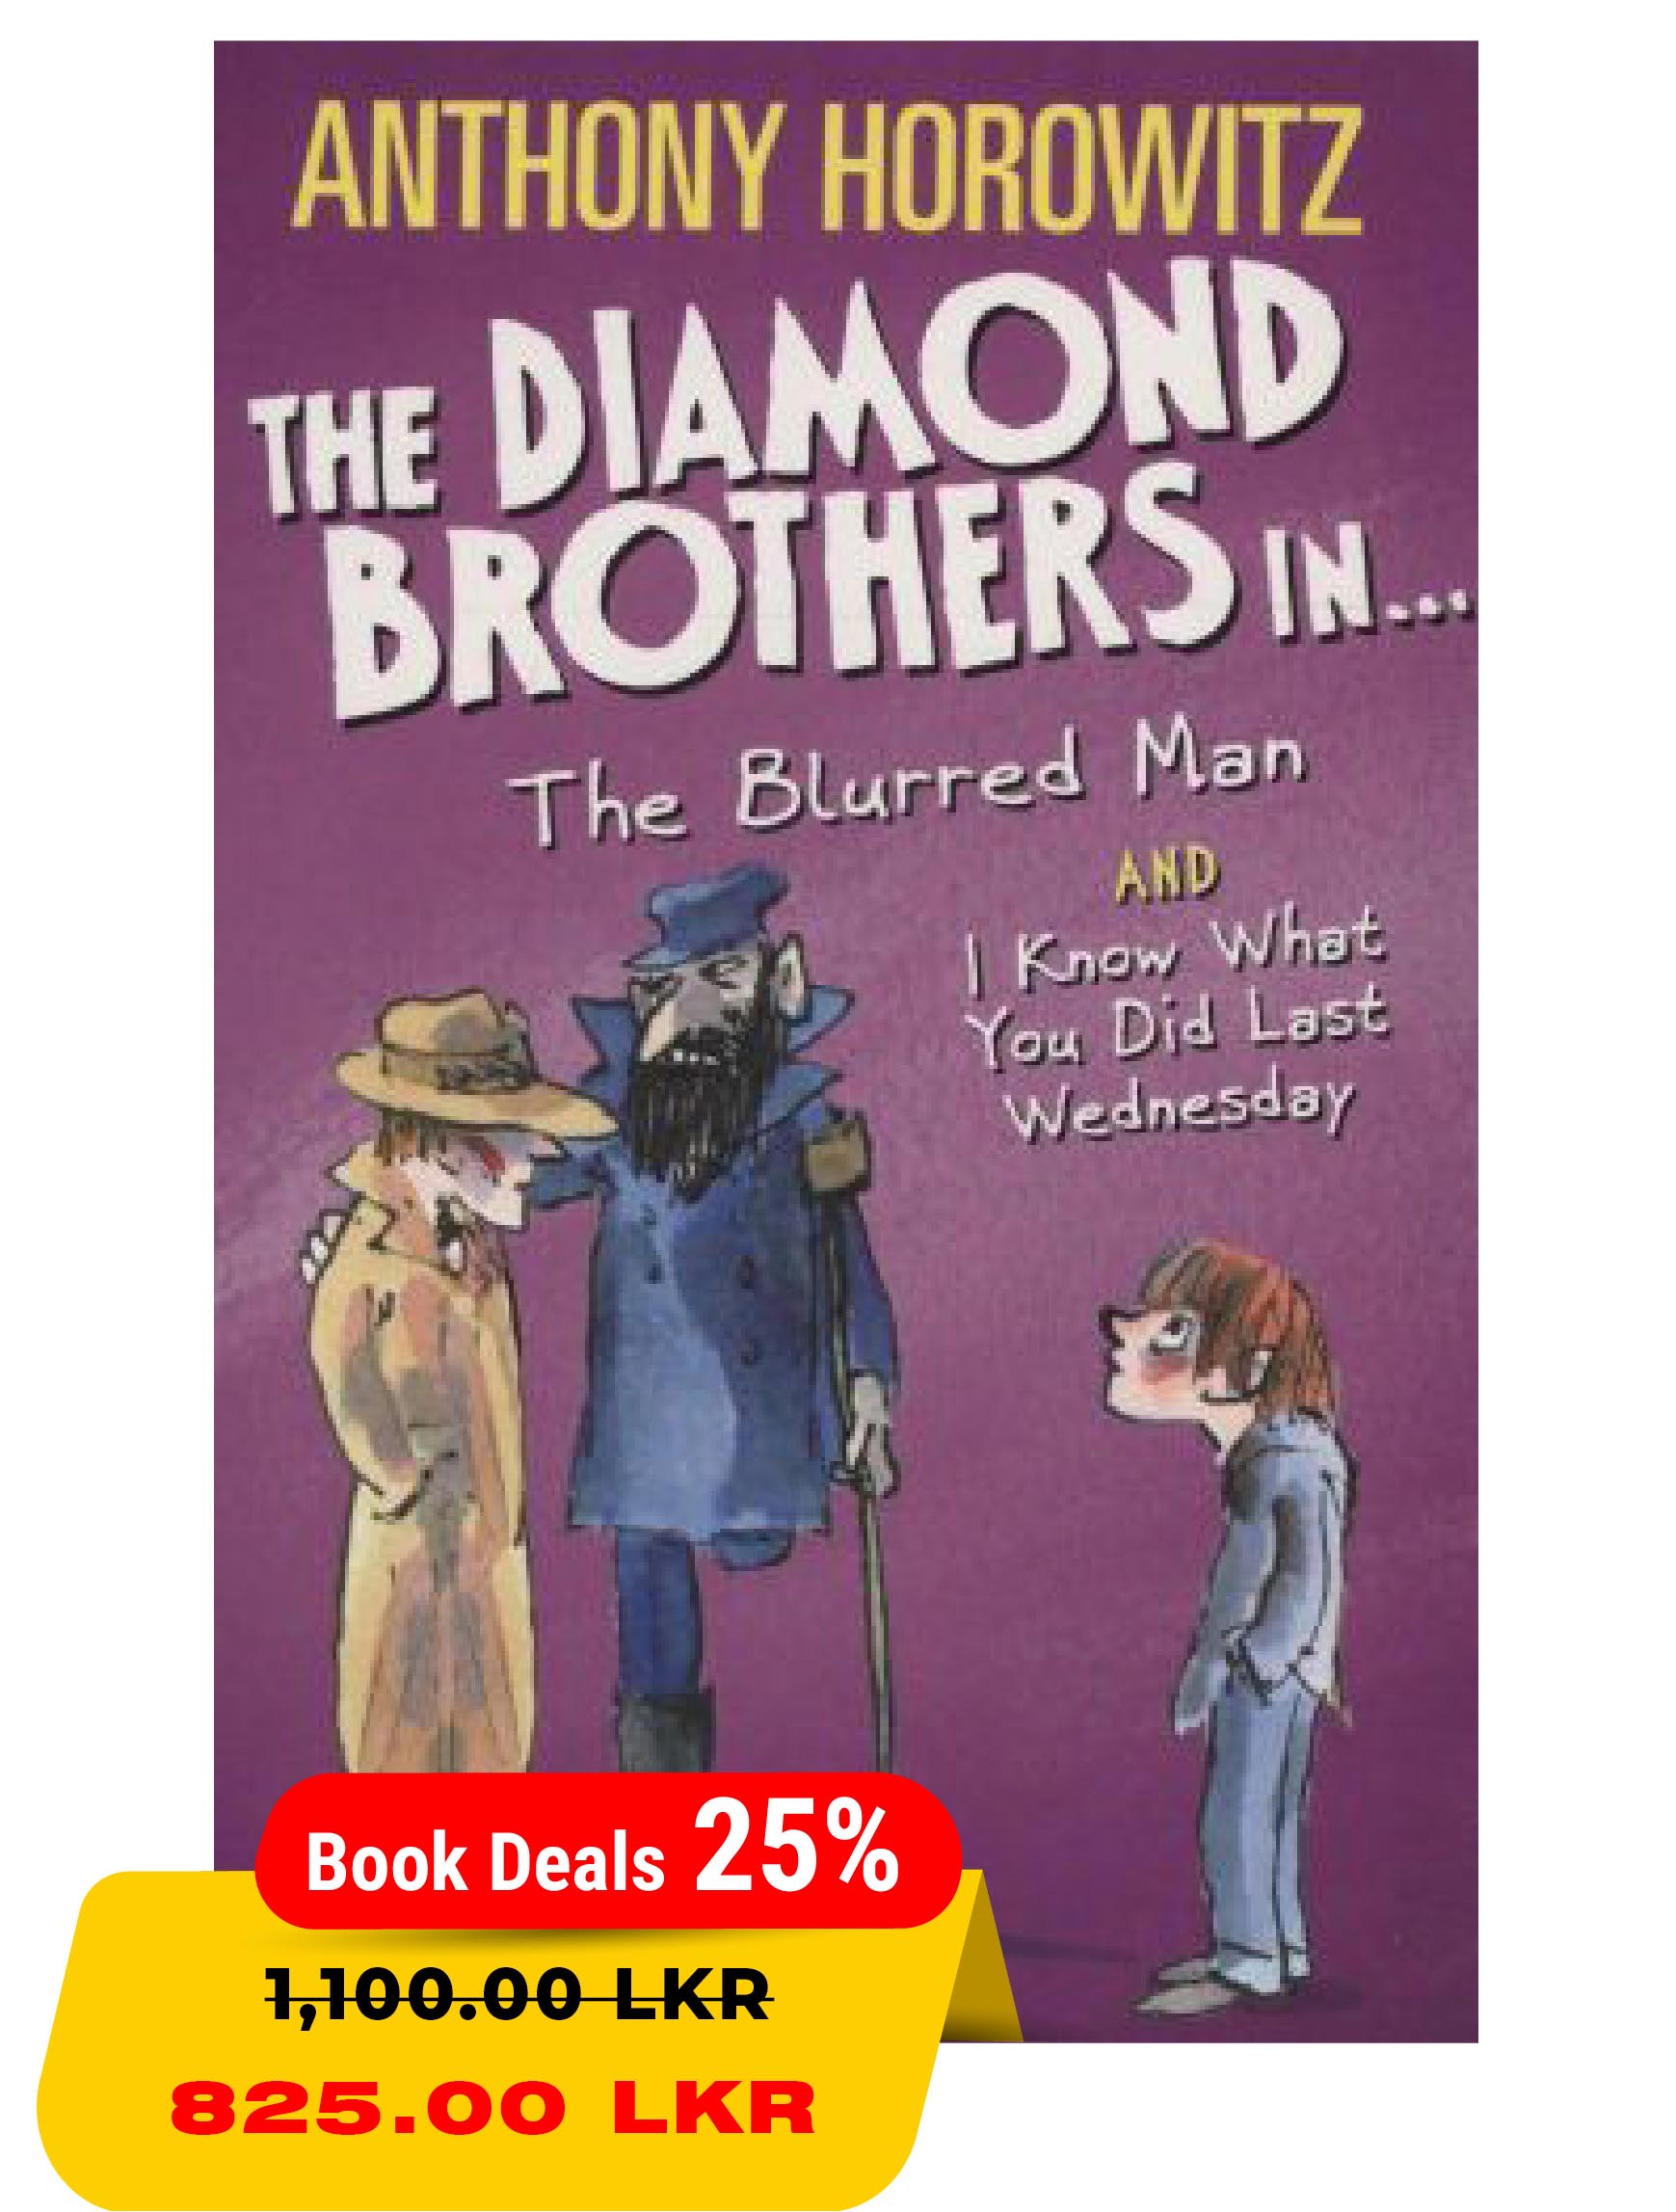 The Diamond Brothers In : The Blurred Man and I Know What You Did Last Wednesday